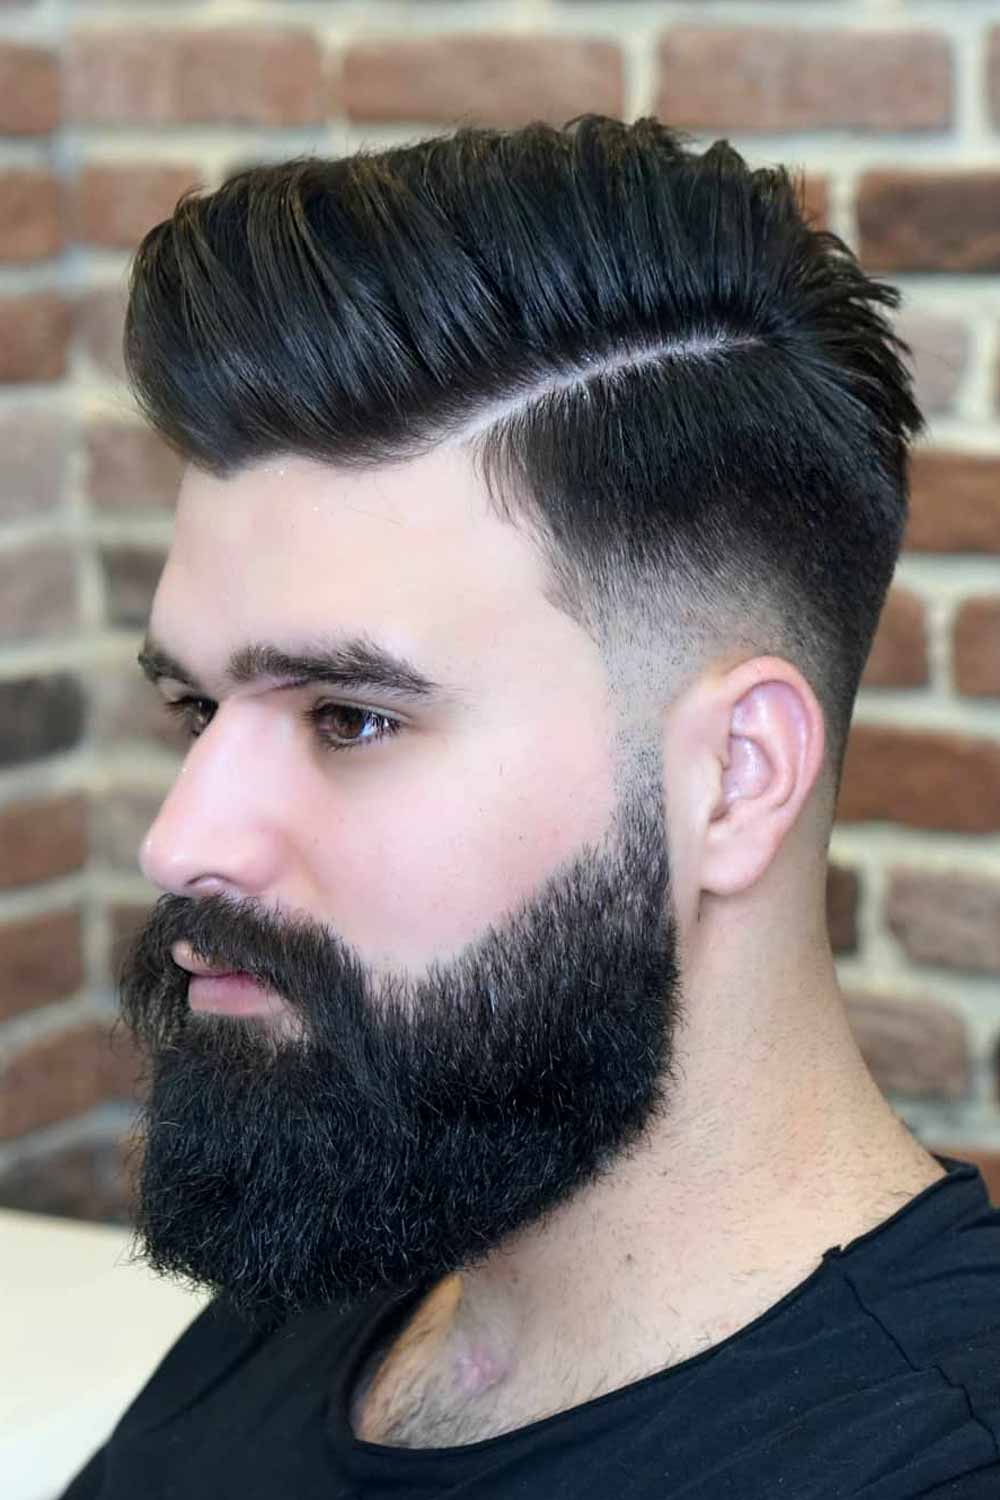 Side Swept Pompadour Round Face Hairstyle Man #roundface #roundfacehaircut #roundfacehairstyle